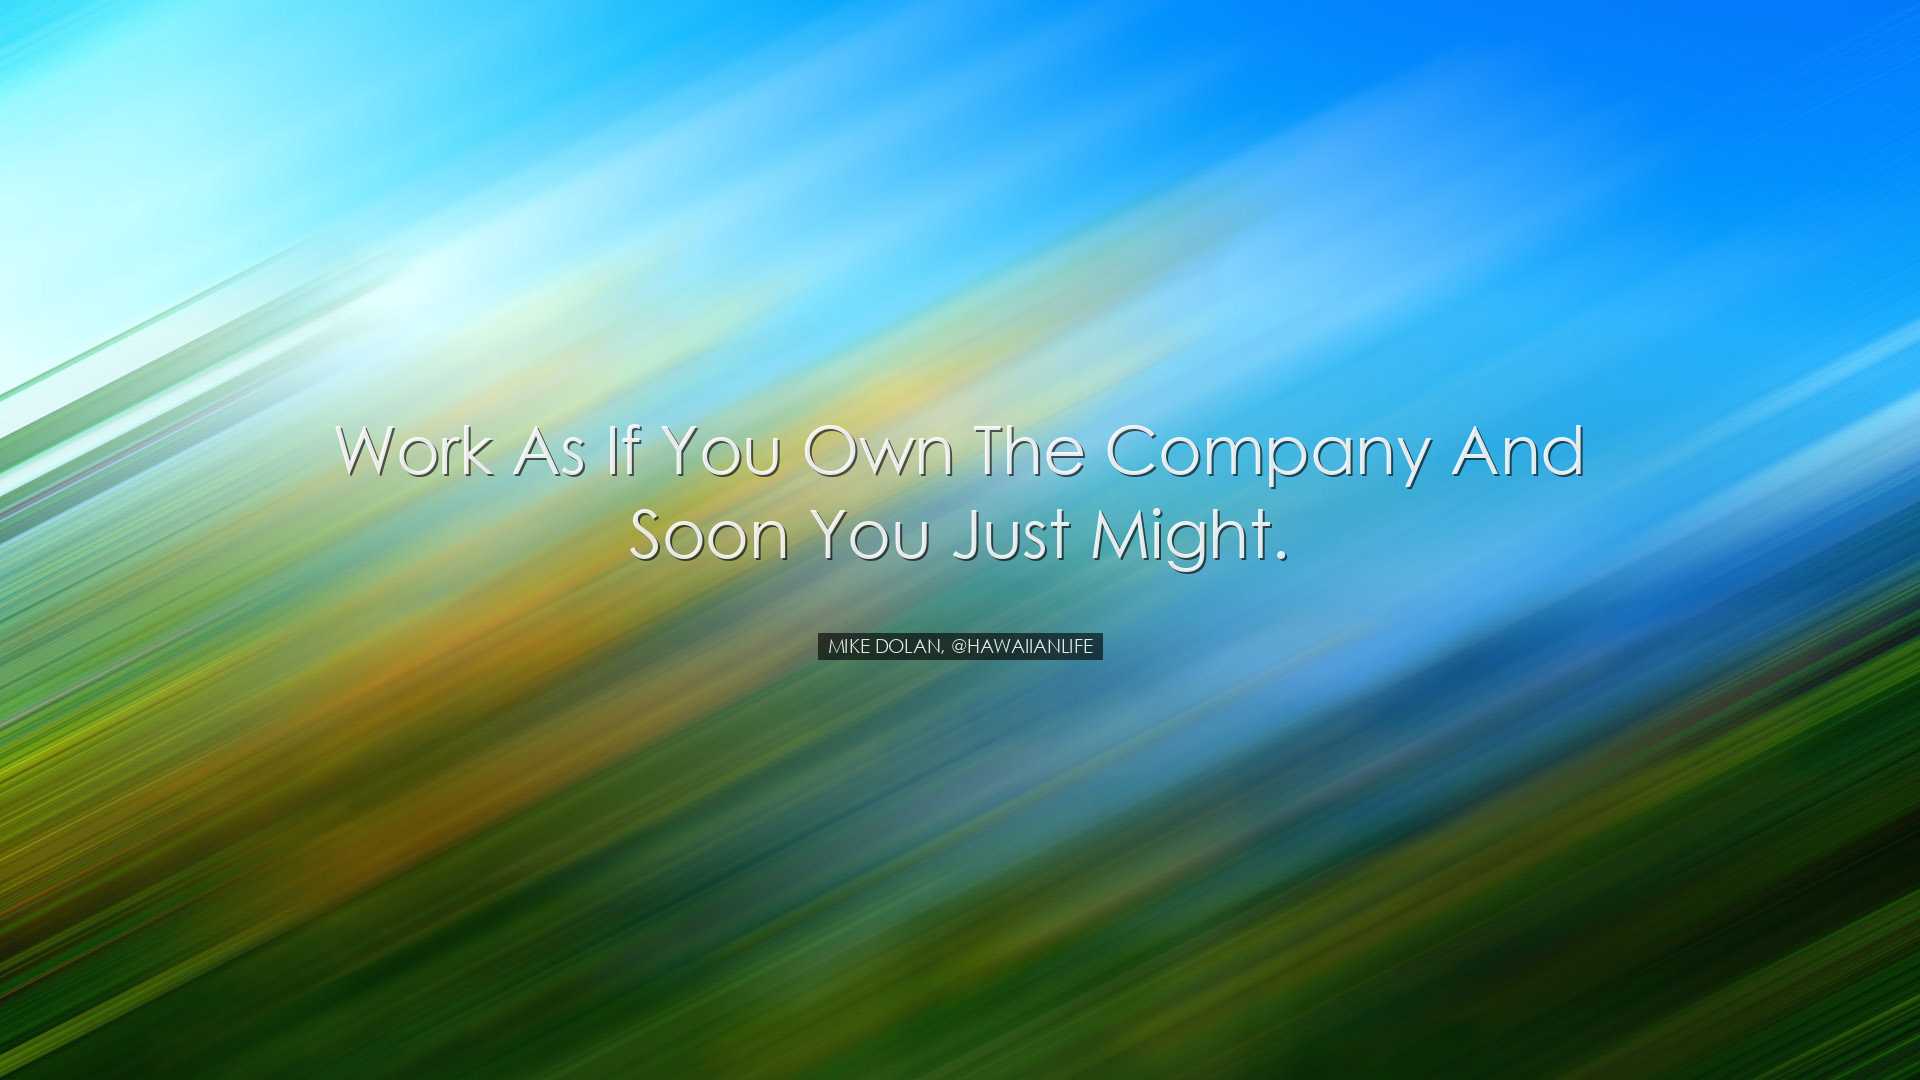 Work as if you own the company and soon you just might. - Mike Dol